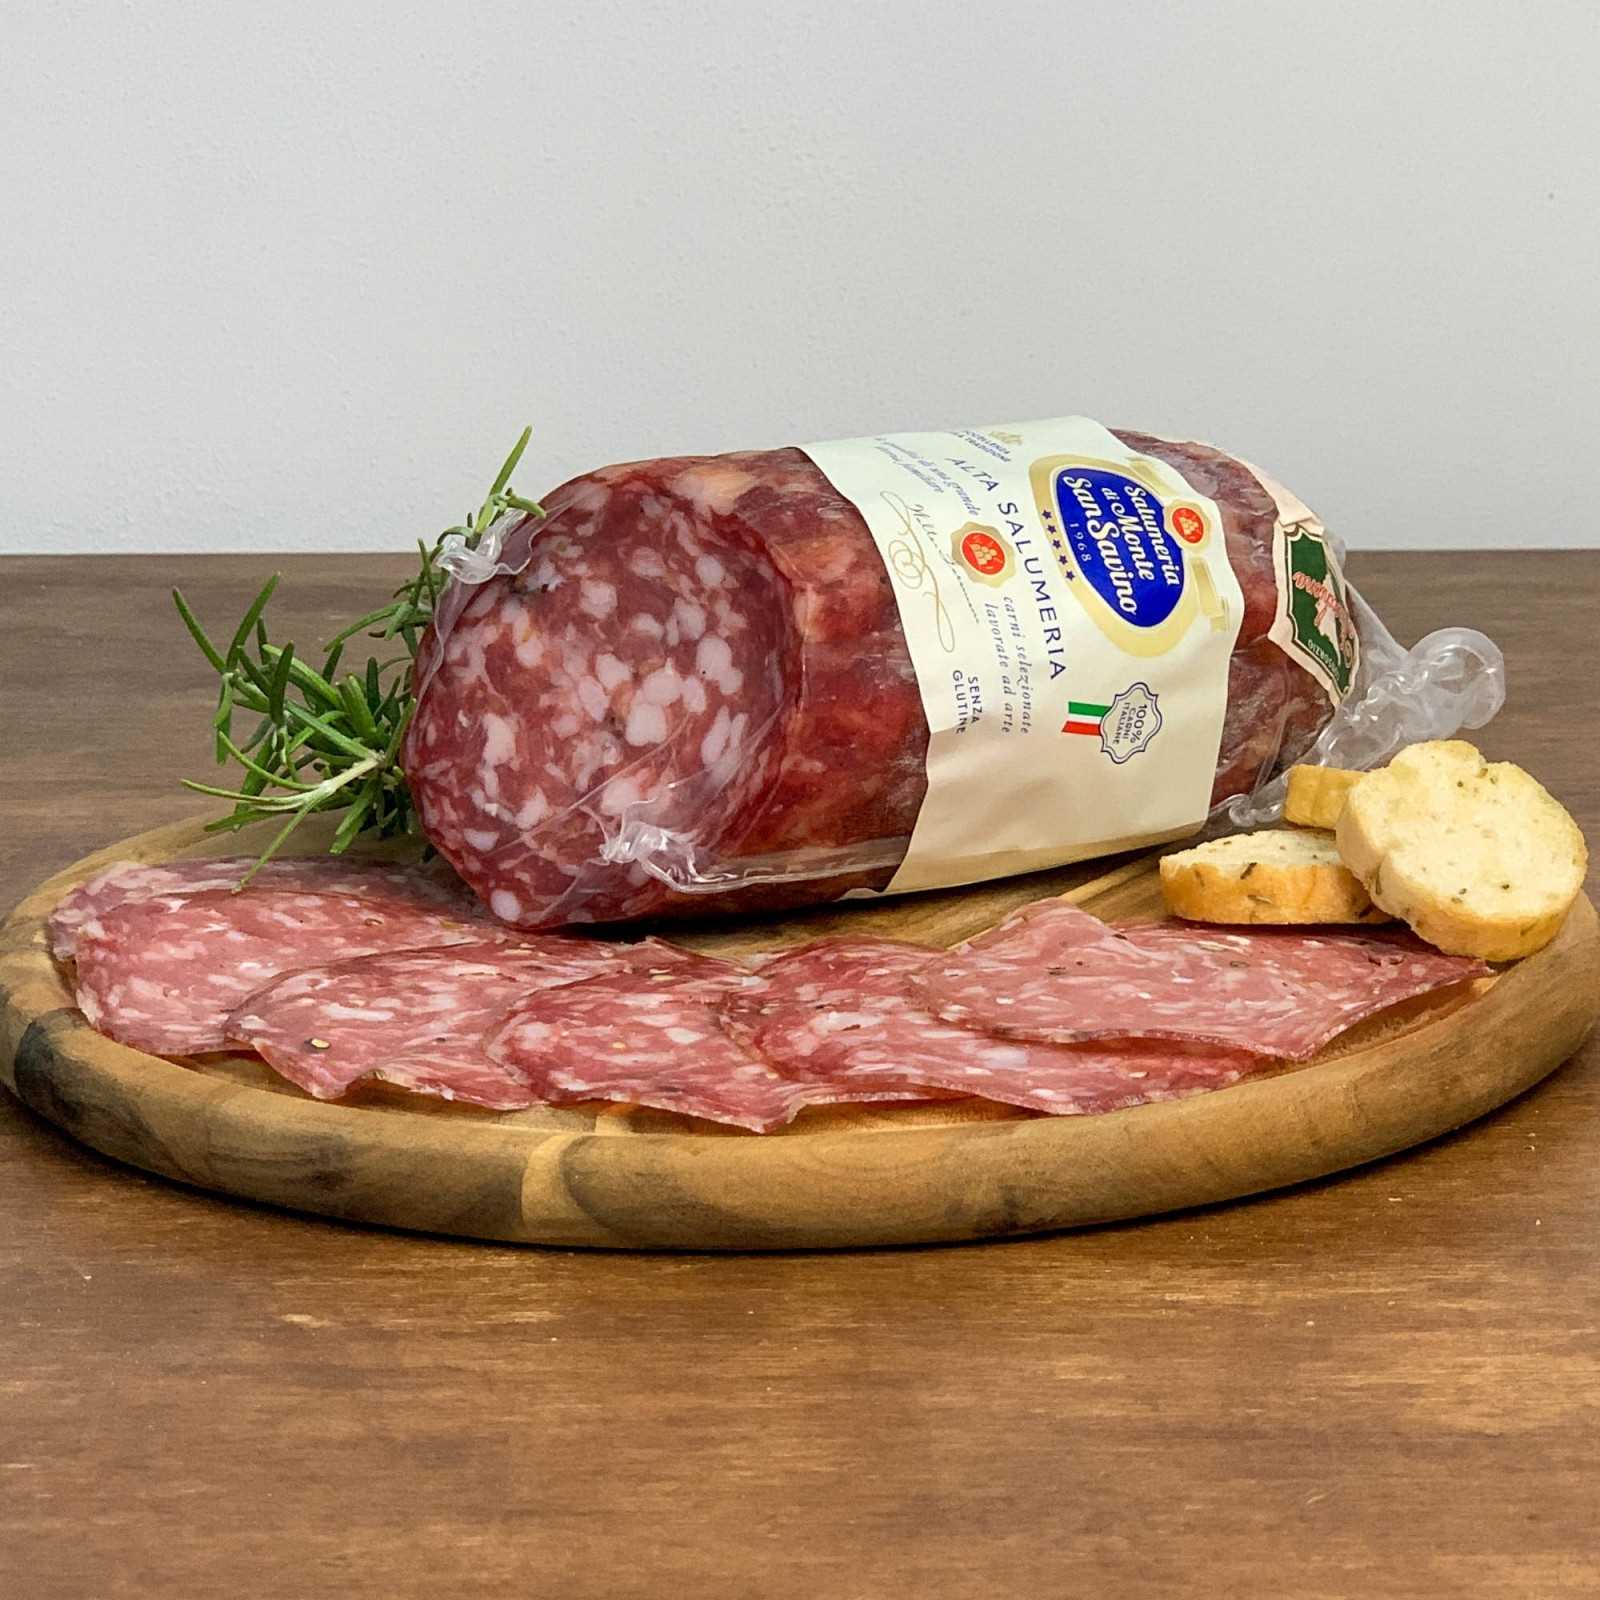 PGI Finocchiona is one of the most famous Tuscan cured meats. It is produced with pork of excellent quality, minced and kneaded, to which wild fennel seeds are added, which give it the characteristic fresh and at the same time intense aroma. This version of PGI Finocchiona has a net weight of about 400 g and is vacuum packed.